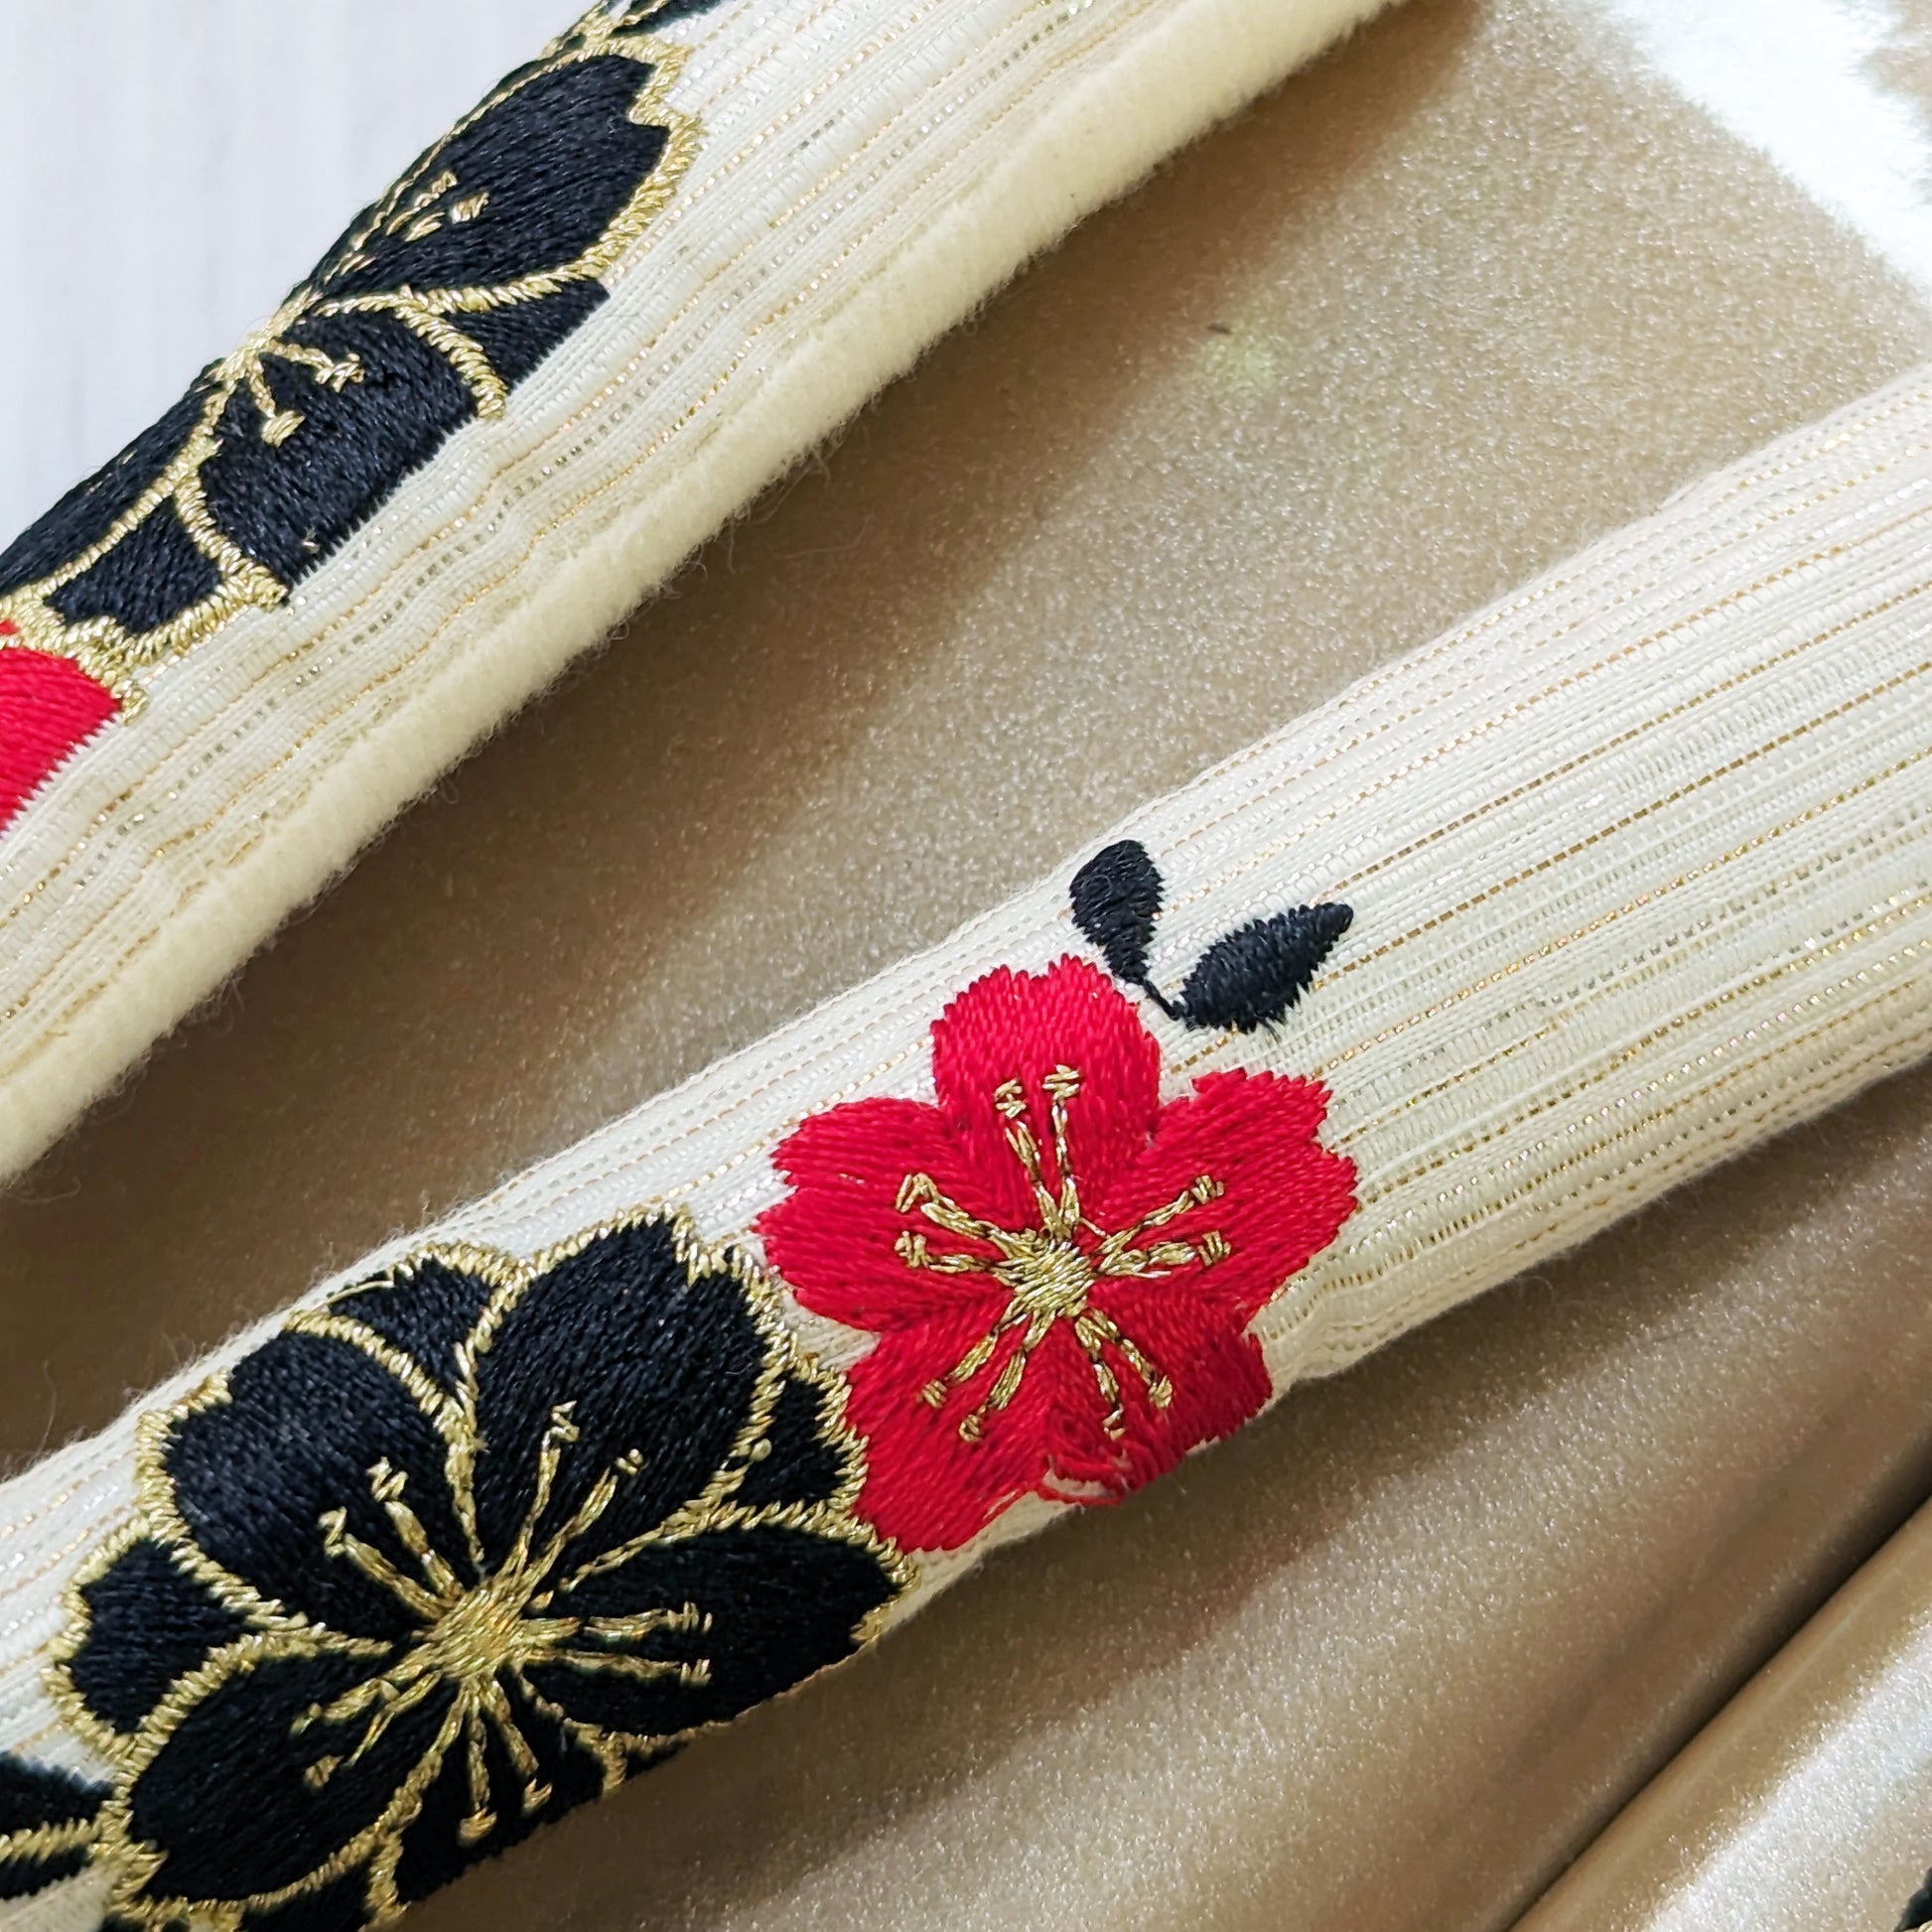 Japanese Traditional Zori Sandals - Cherry Blossoms Embroidery Gold